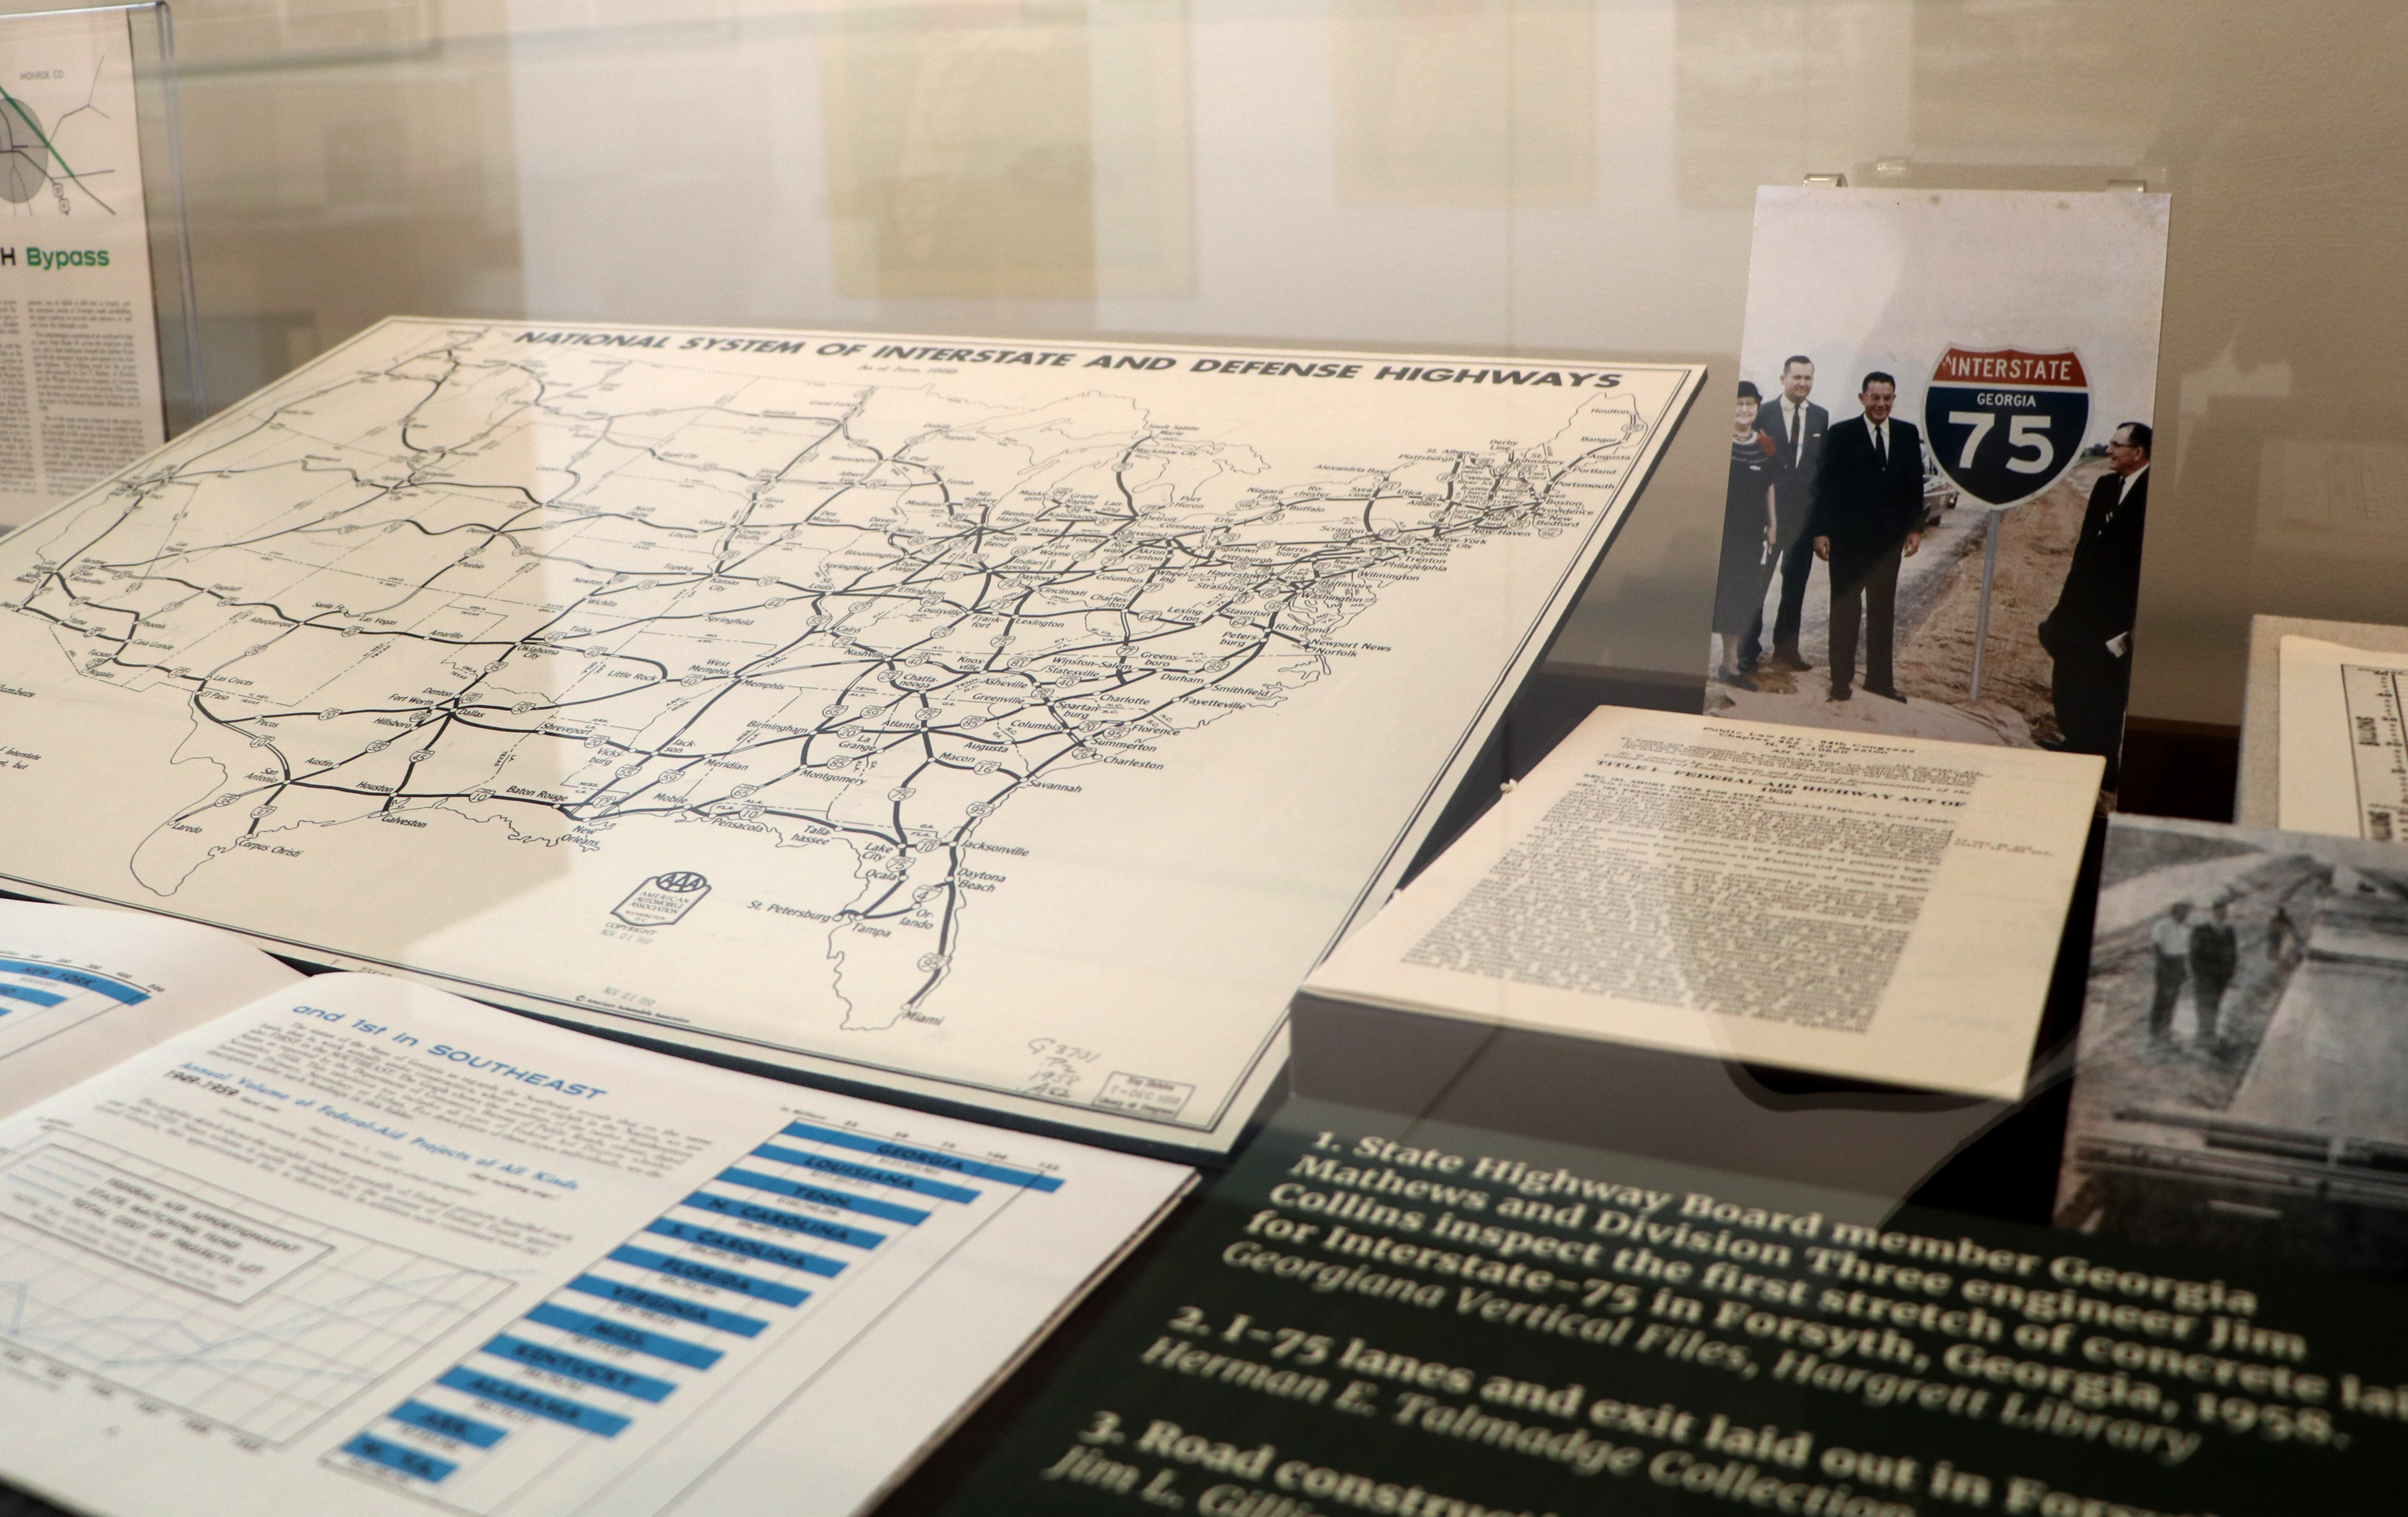 Exhibit case with map and photo of men by interstate sign